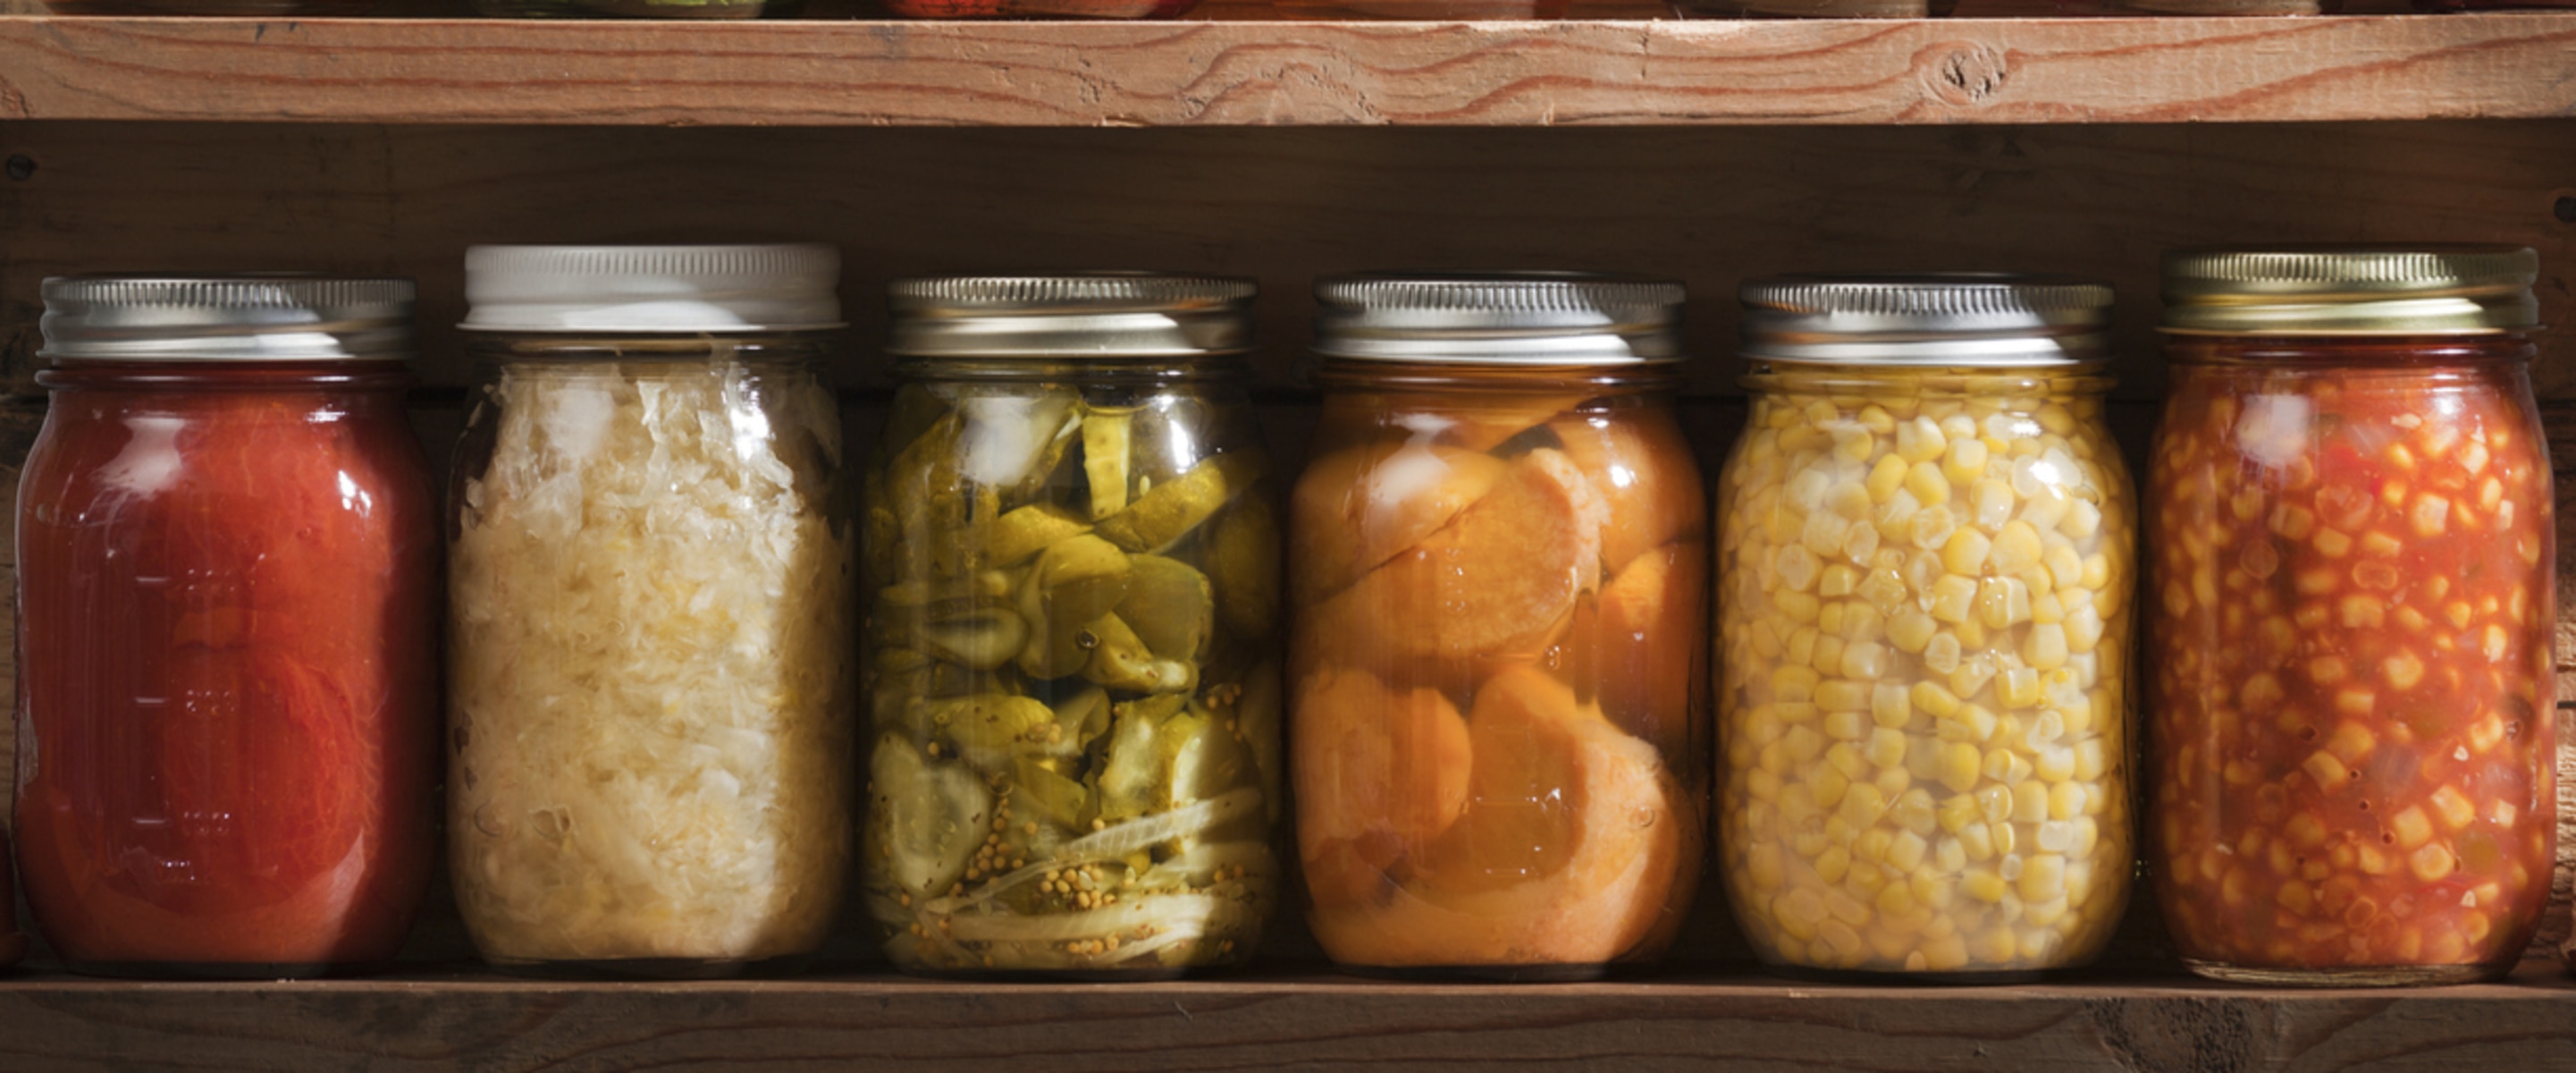 More Than Just Pickles: Fermented Food to Eat for Gut Health